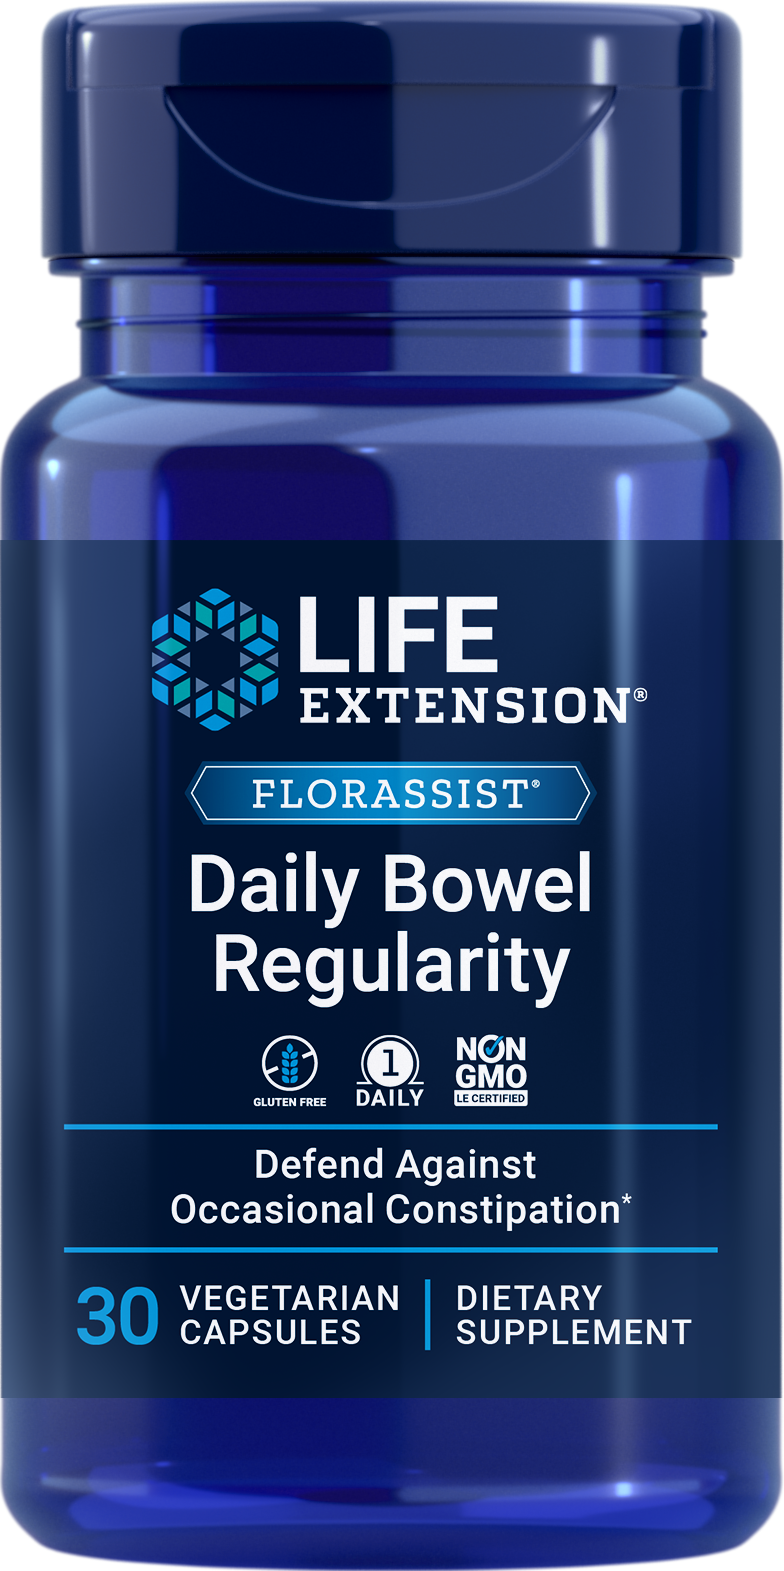 Life Extension’s new FLORASSIST® Daily Bowel Regularity contains clinically studied Bifidobacterium lactis HN019, a probiotic strain shown to encourage and maintain bowel regularity and comfort, non-GMO, once-daily-dosing, vegetarian dietary supplement. Defends against occasional constipation.